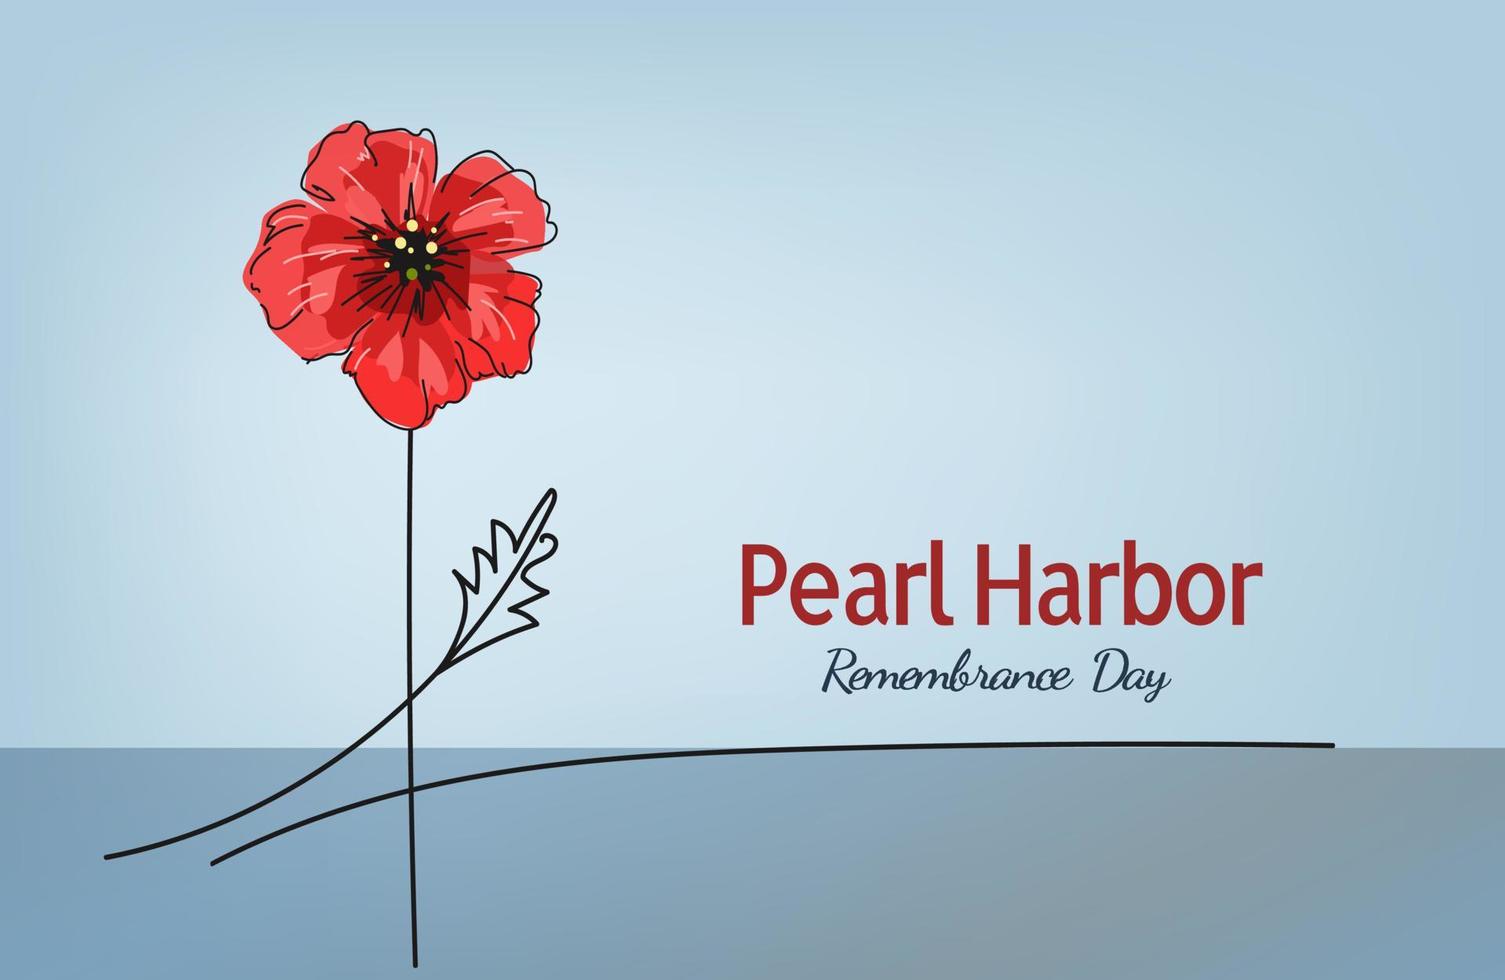 Red bright poppy flower, Vector doodle banner for Pearl Harbor Remembrance Day